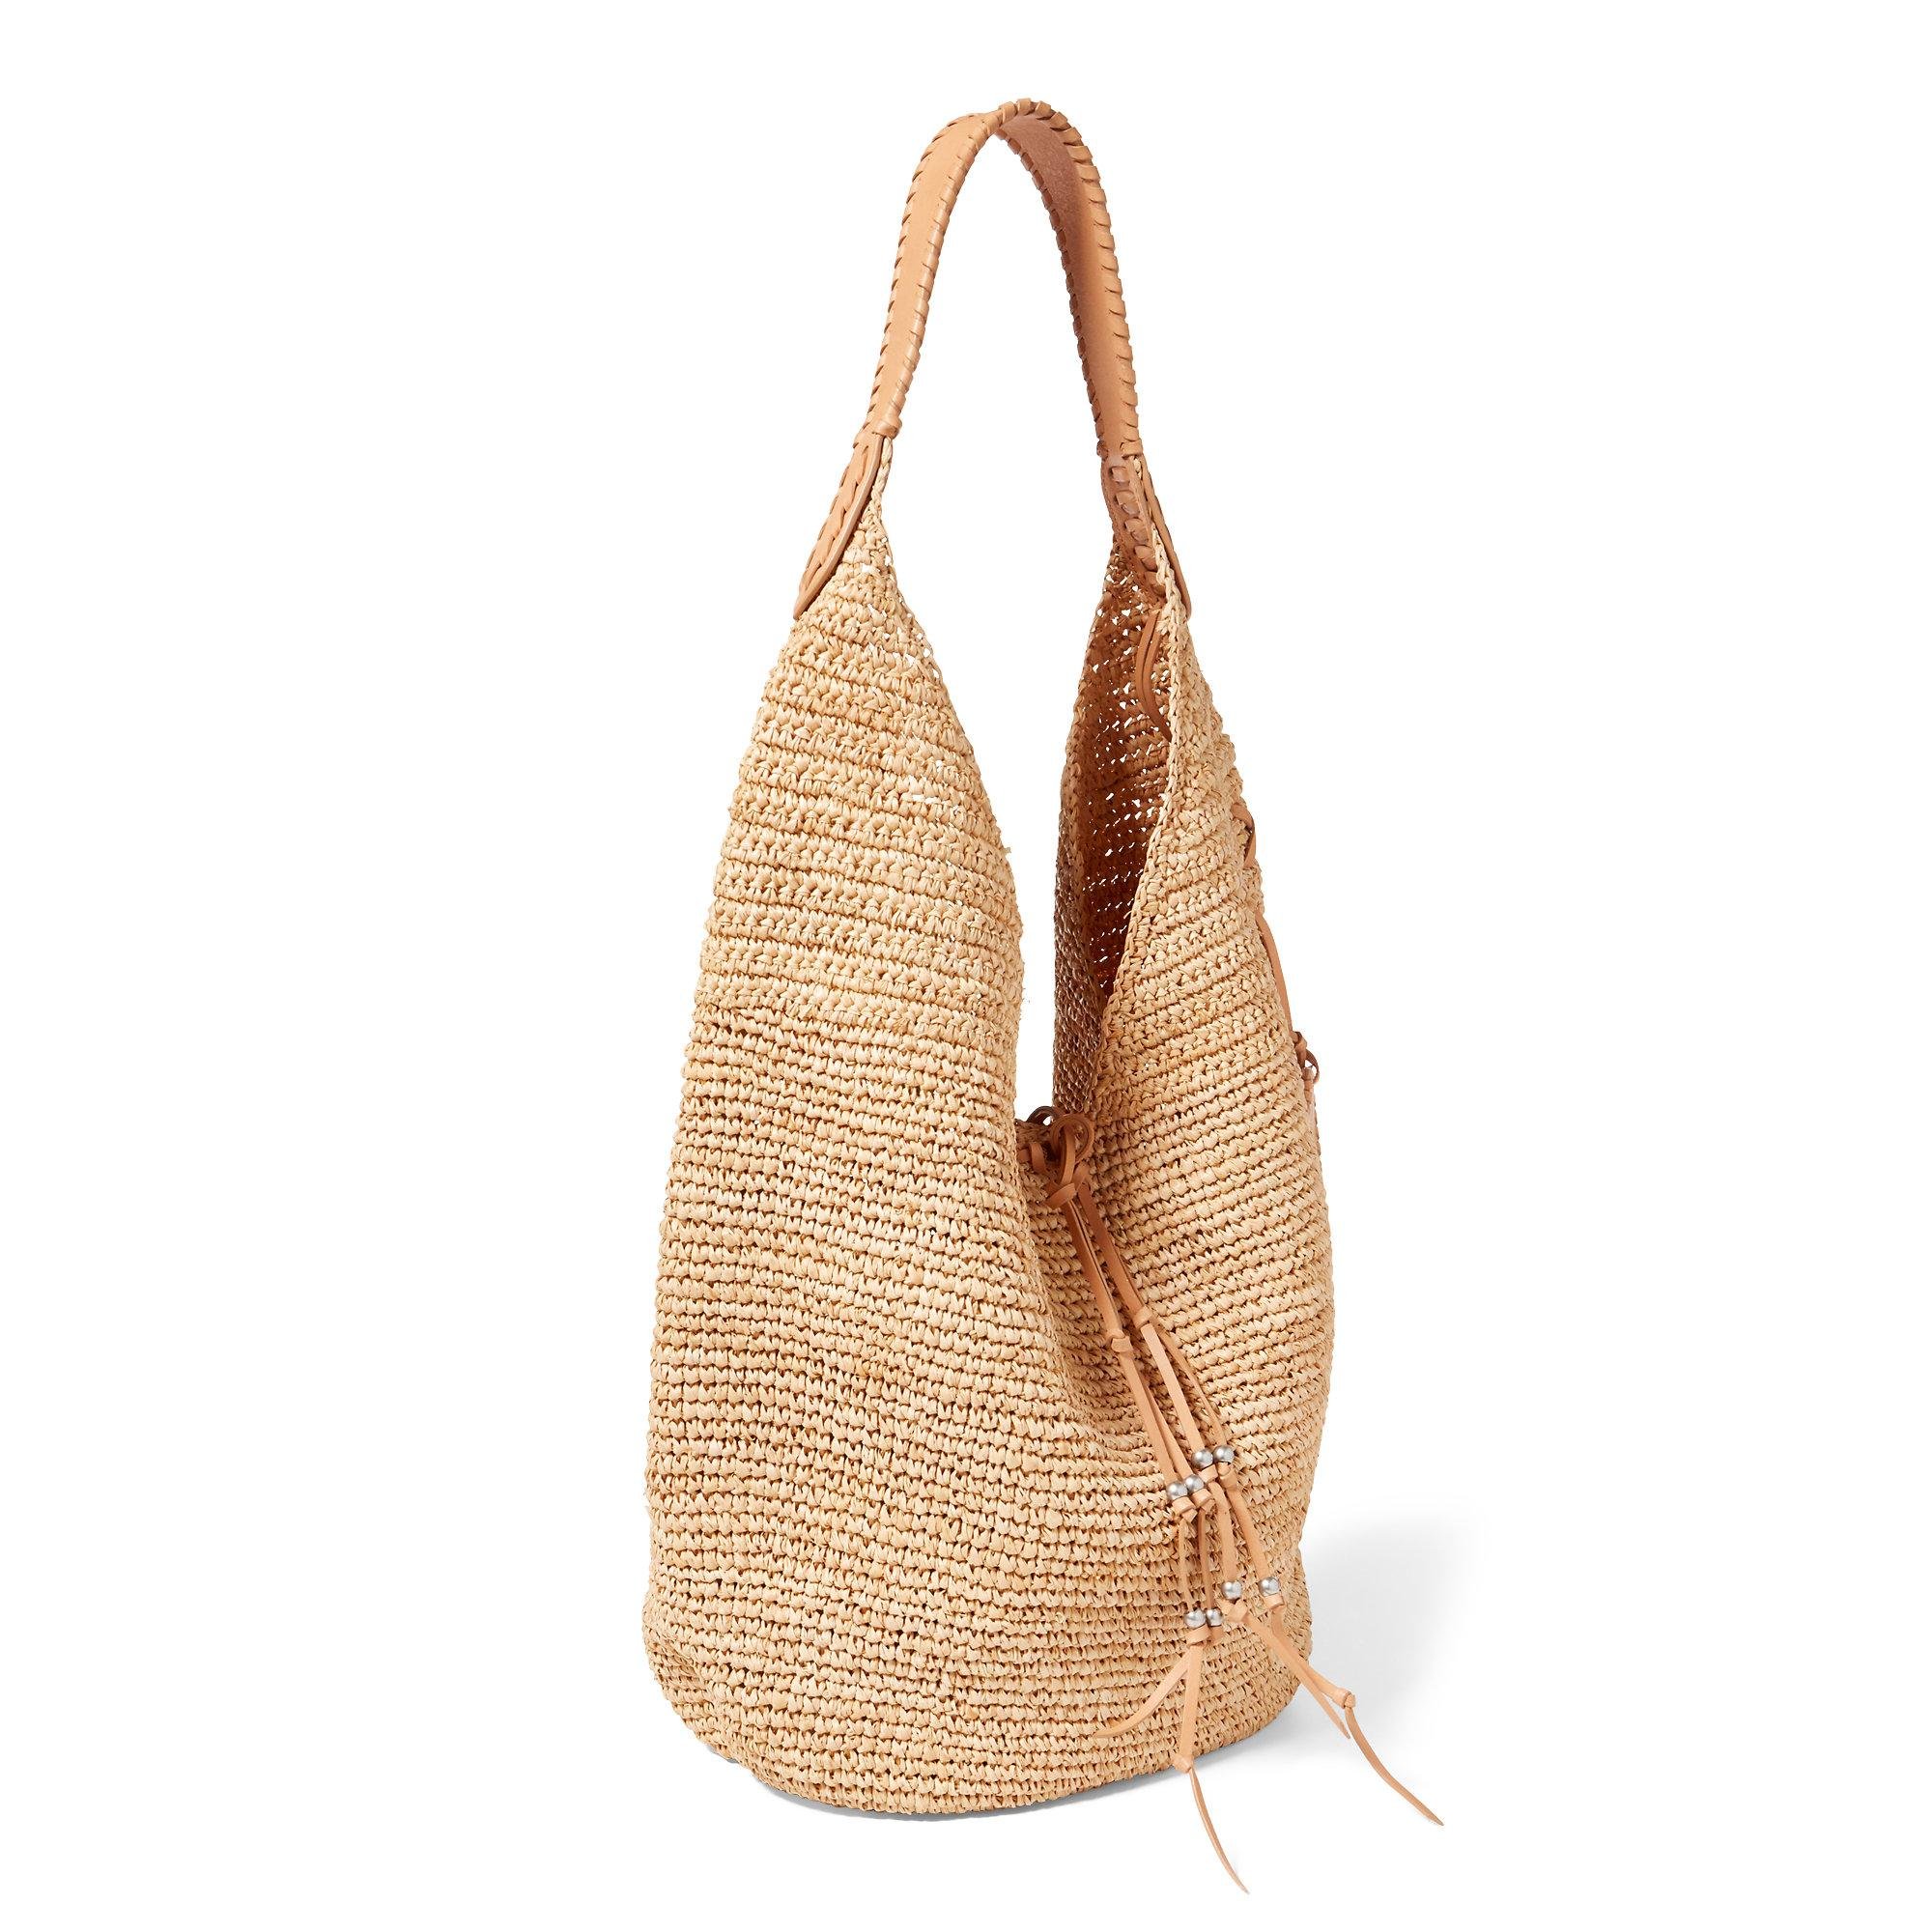 Polo Ralph Lauren Leather Raffia Hobo Bag in Natural - Lyst